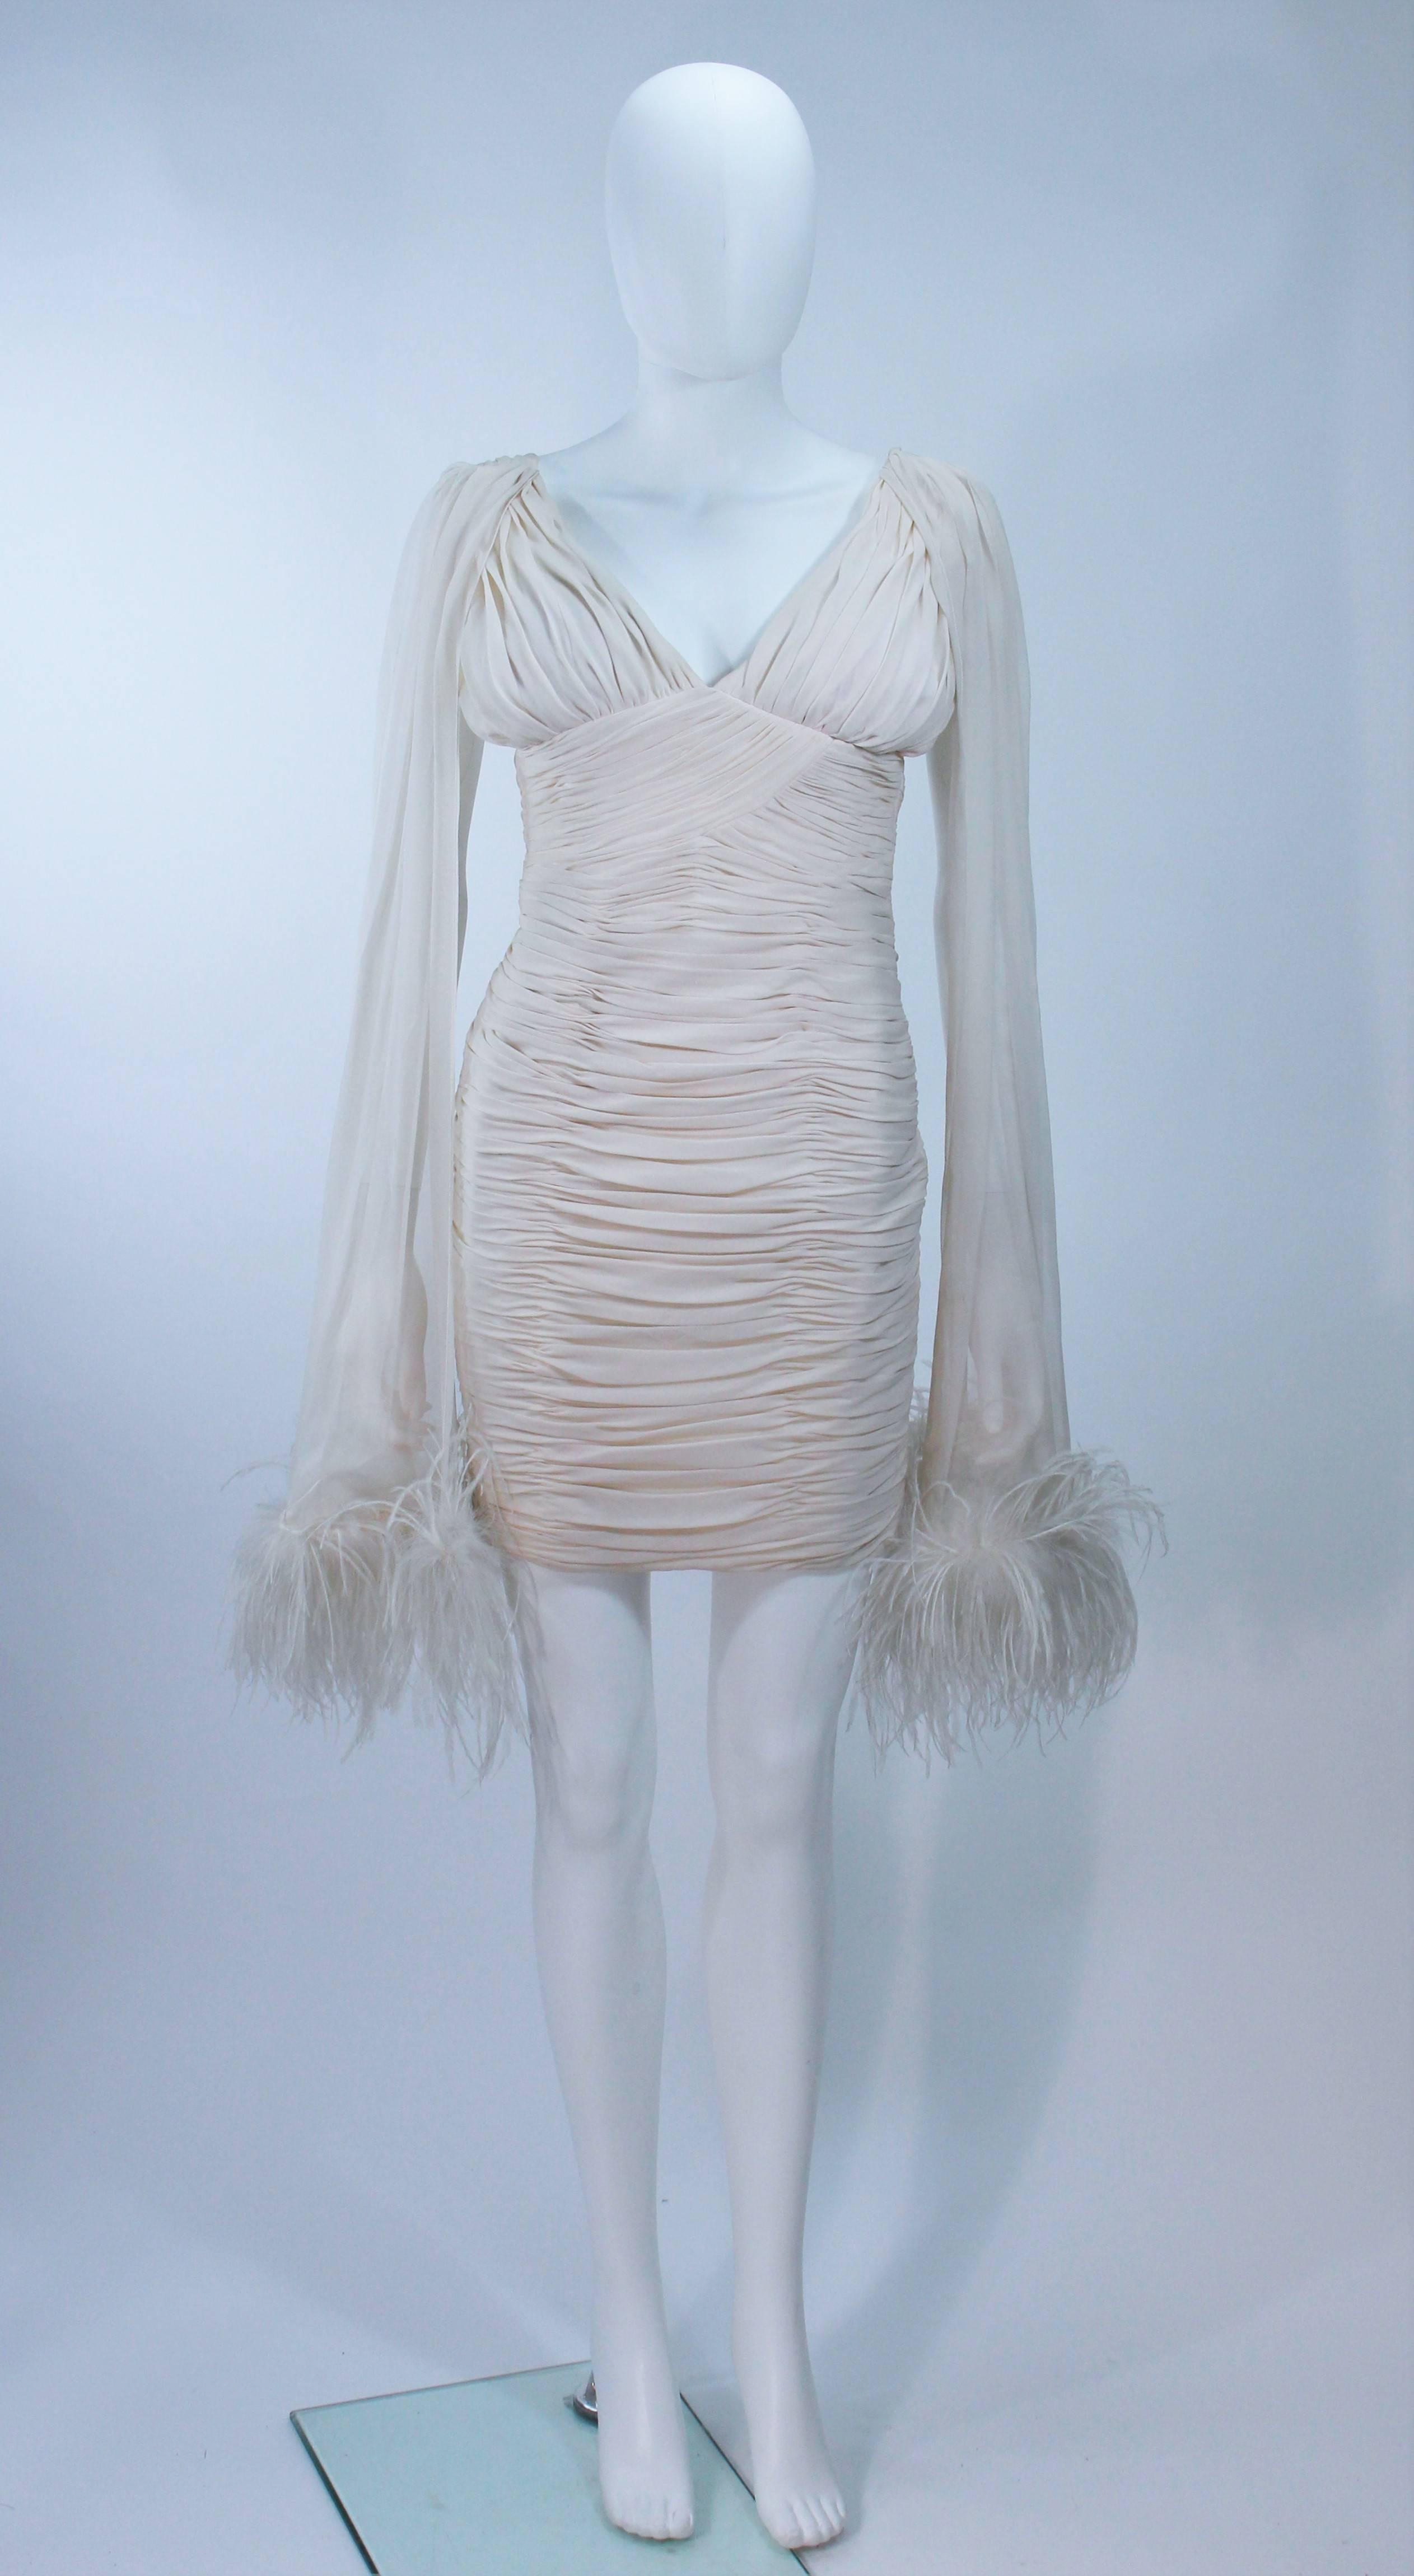  This vintage design is available for viewing at our Beverly Hills Boutique. We offer a large selection of evening gowns and luxury garments. 

 This cocktail dress is composed of a ruched white fabric with chiffon accents and feather applique.